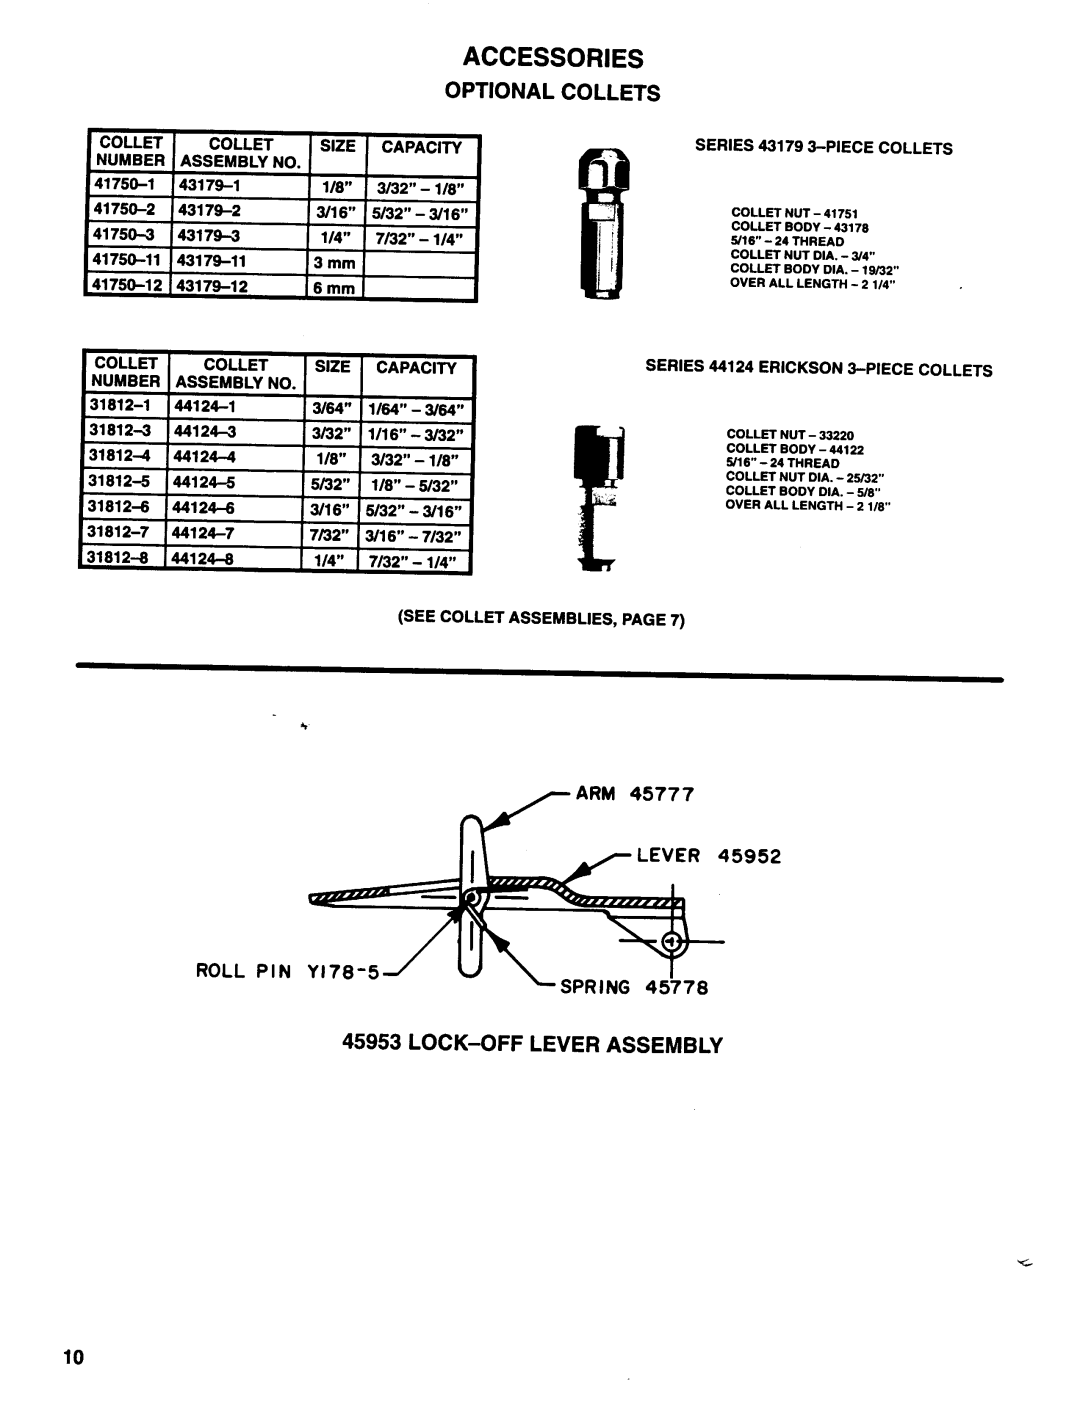 Ingersoll-Rand 8478-A1, 8475-A-( ), 8476-A1 manual Accessories, Optional Collets, Lock-Off Lever Assembly, ROLL PIN Yl78-5 